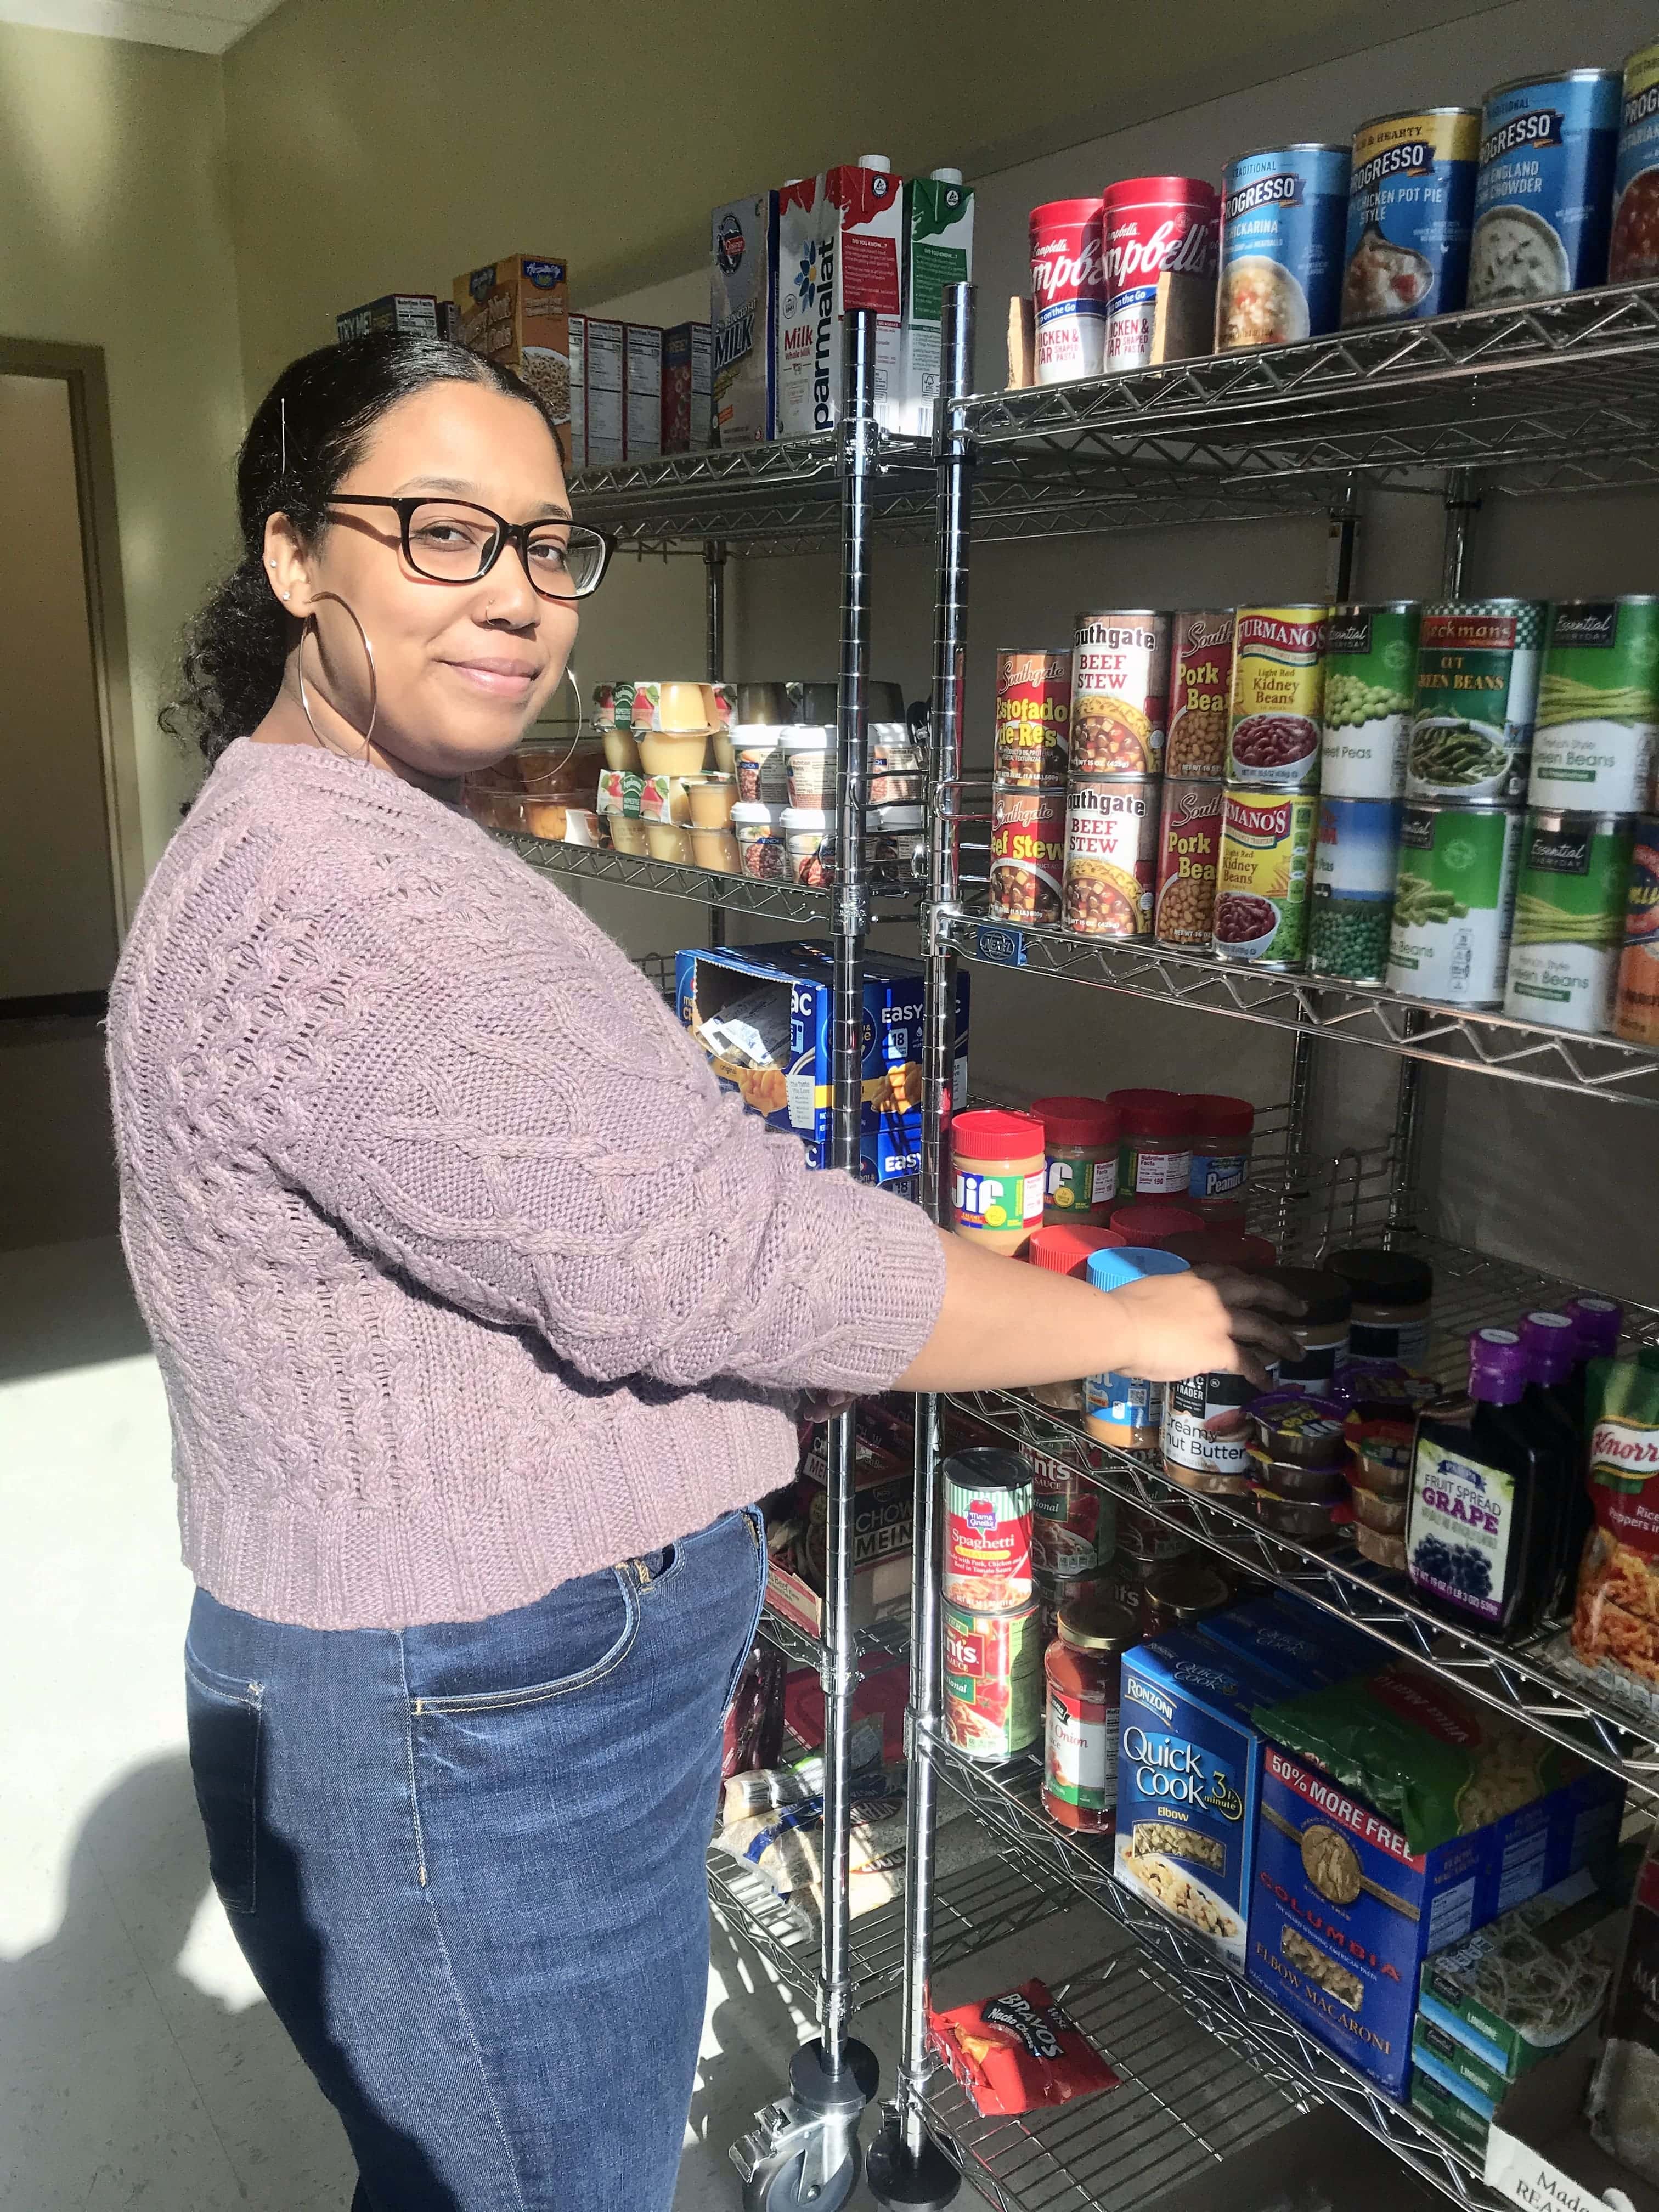 Food pantry worker stocking the shelves